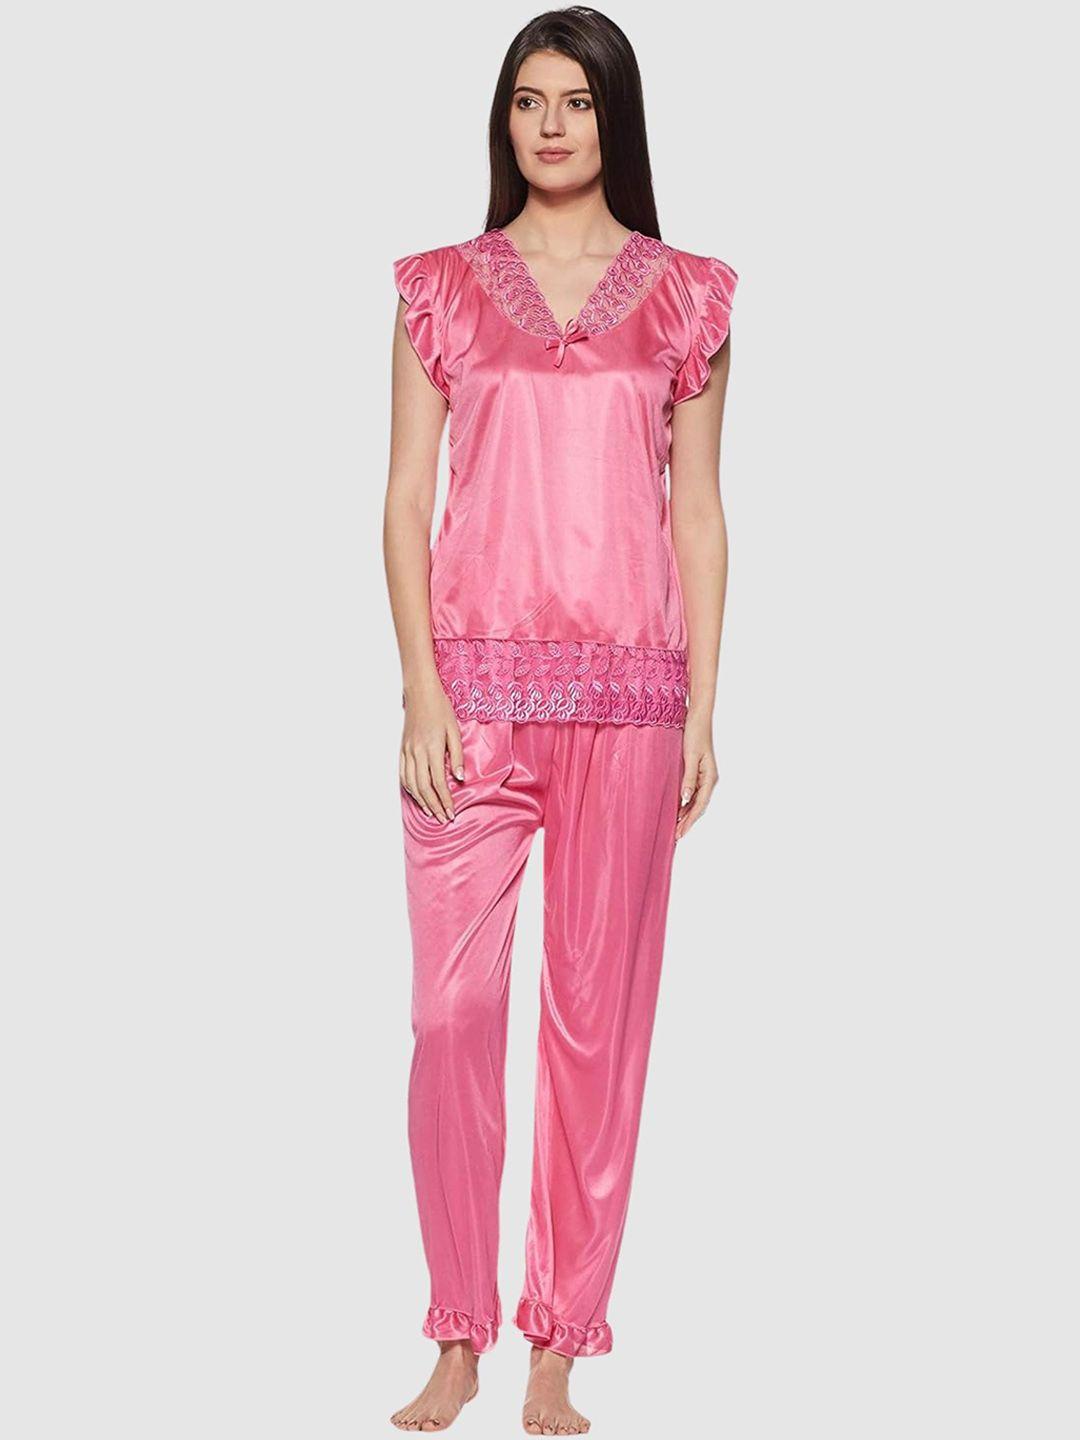 fabme short sleeves satin lace night suit